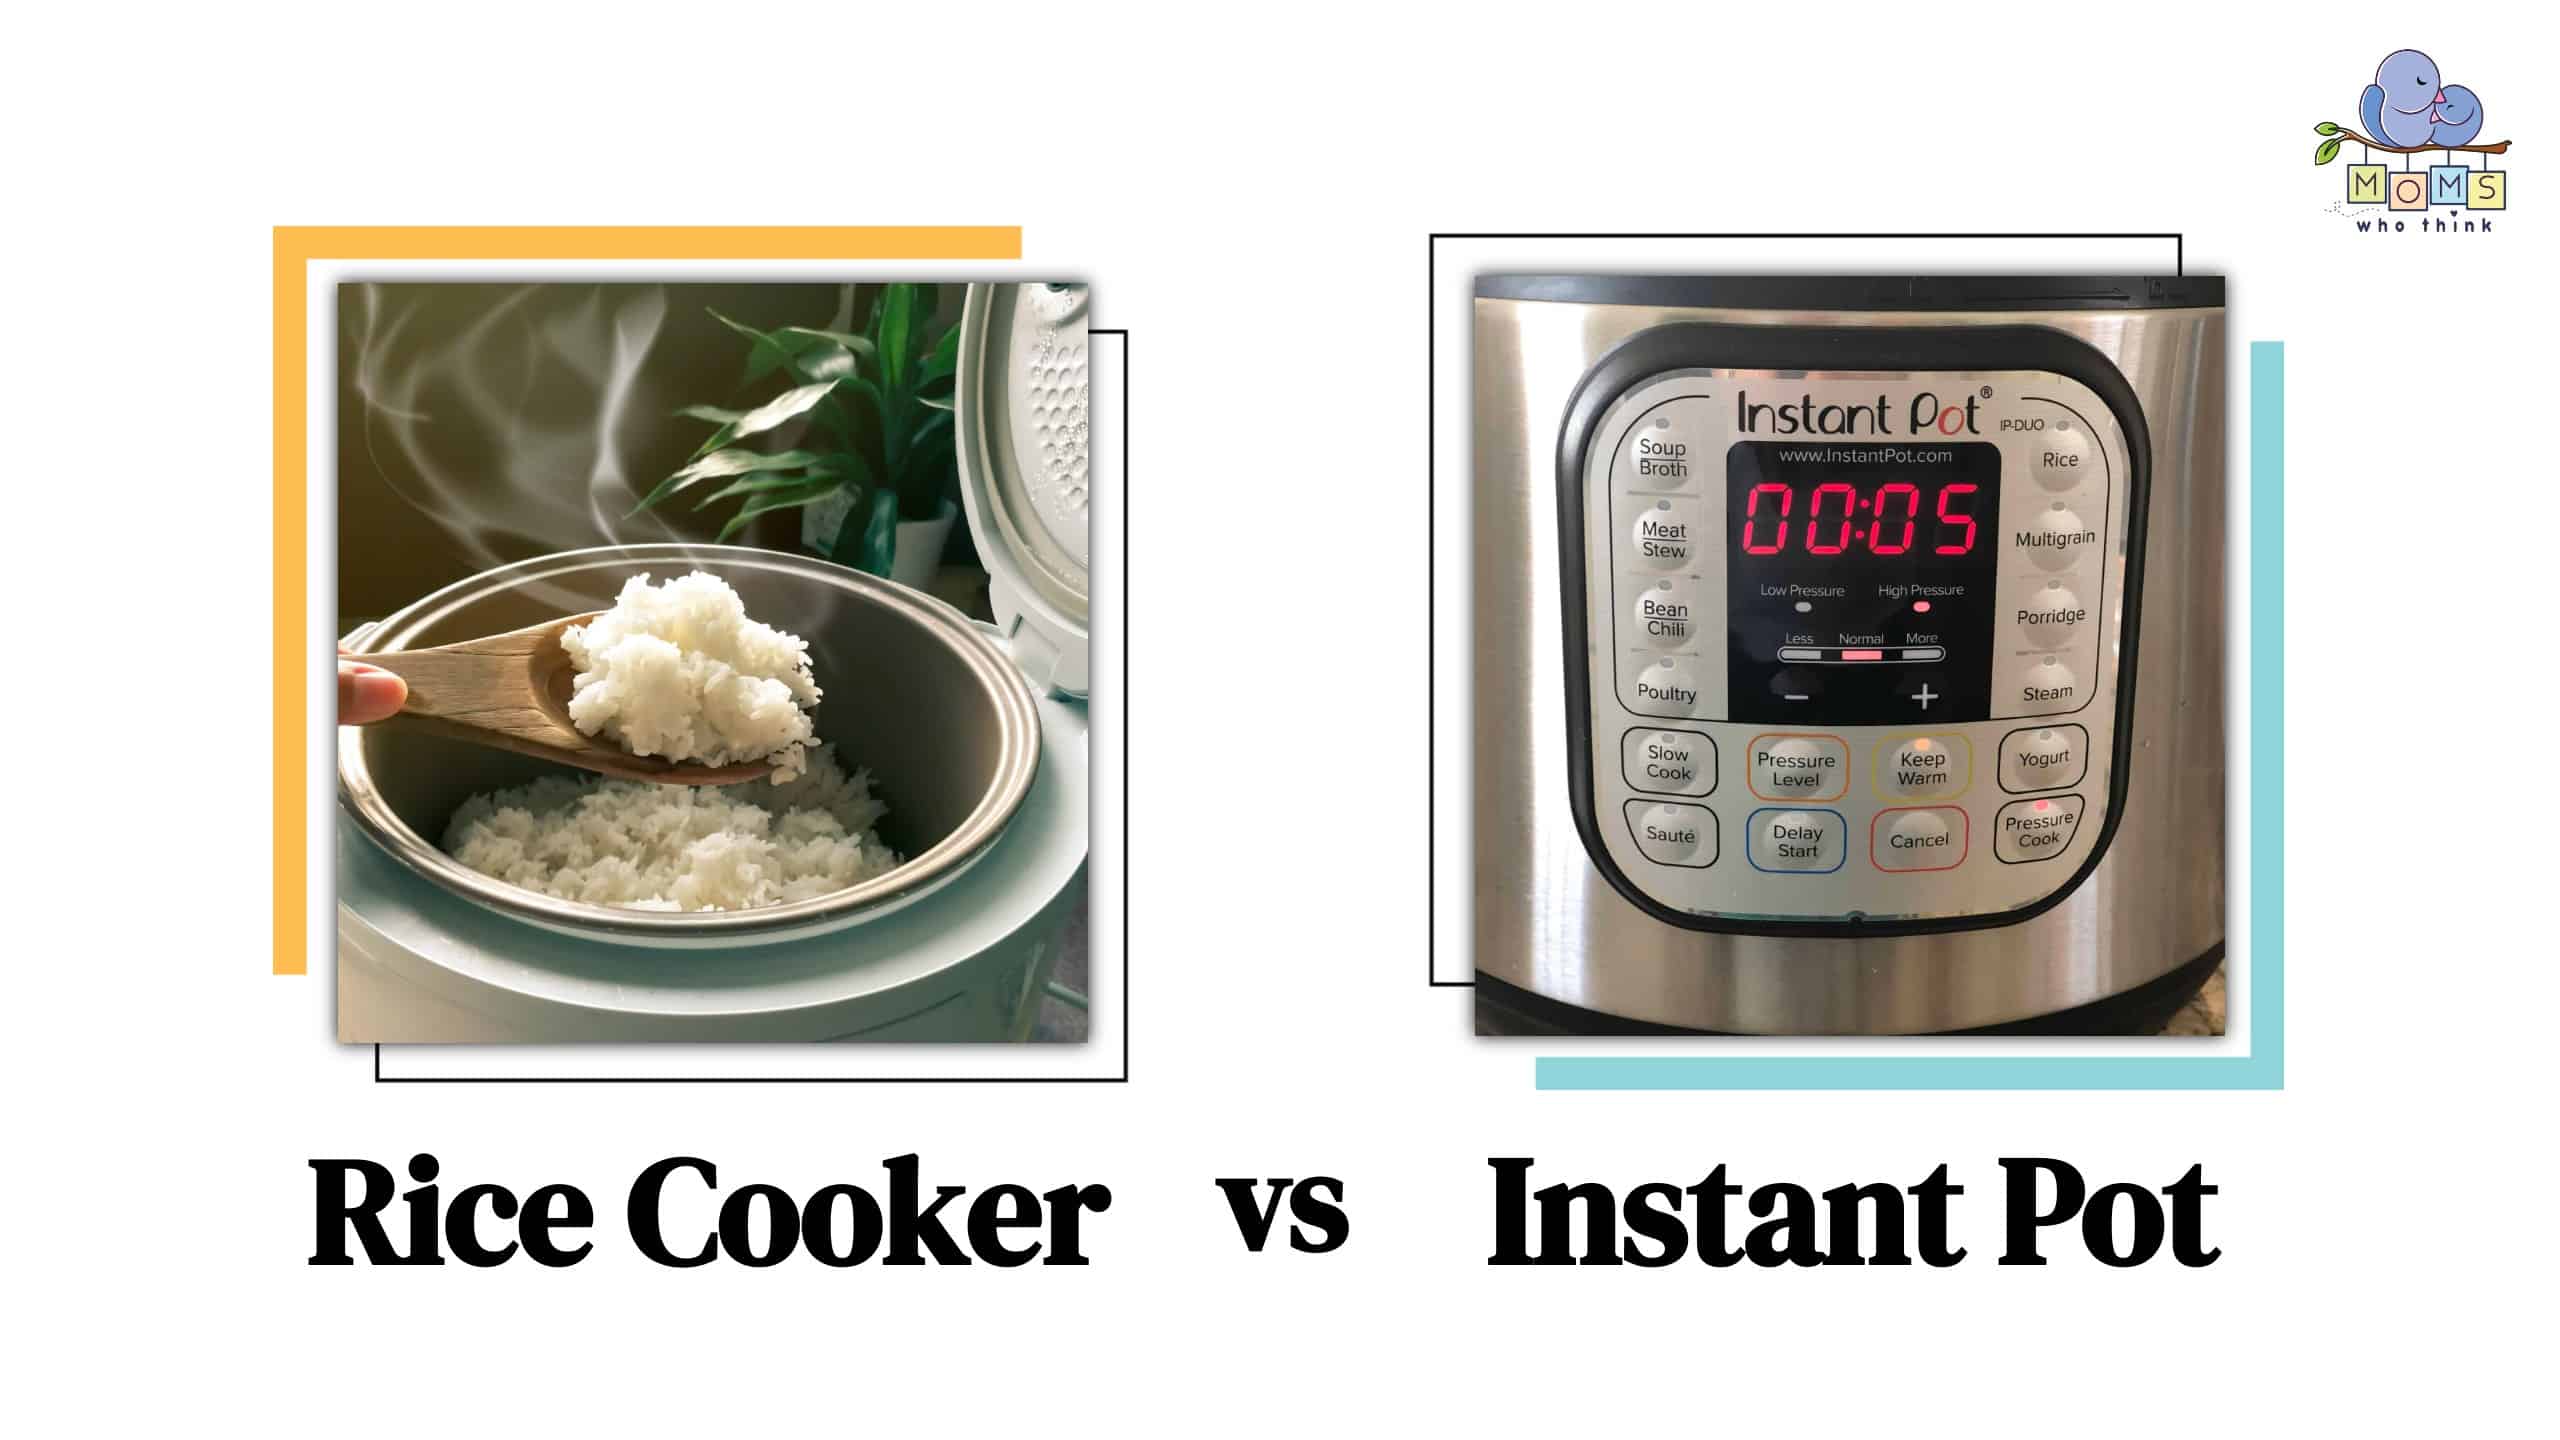 Slow Cooker and Instant Pot Rice Bowls - Slow Cooker or Pressure Cooker